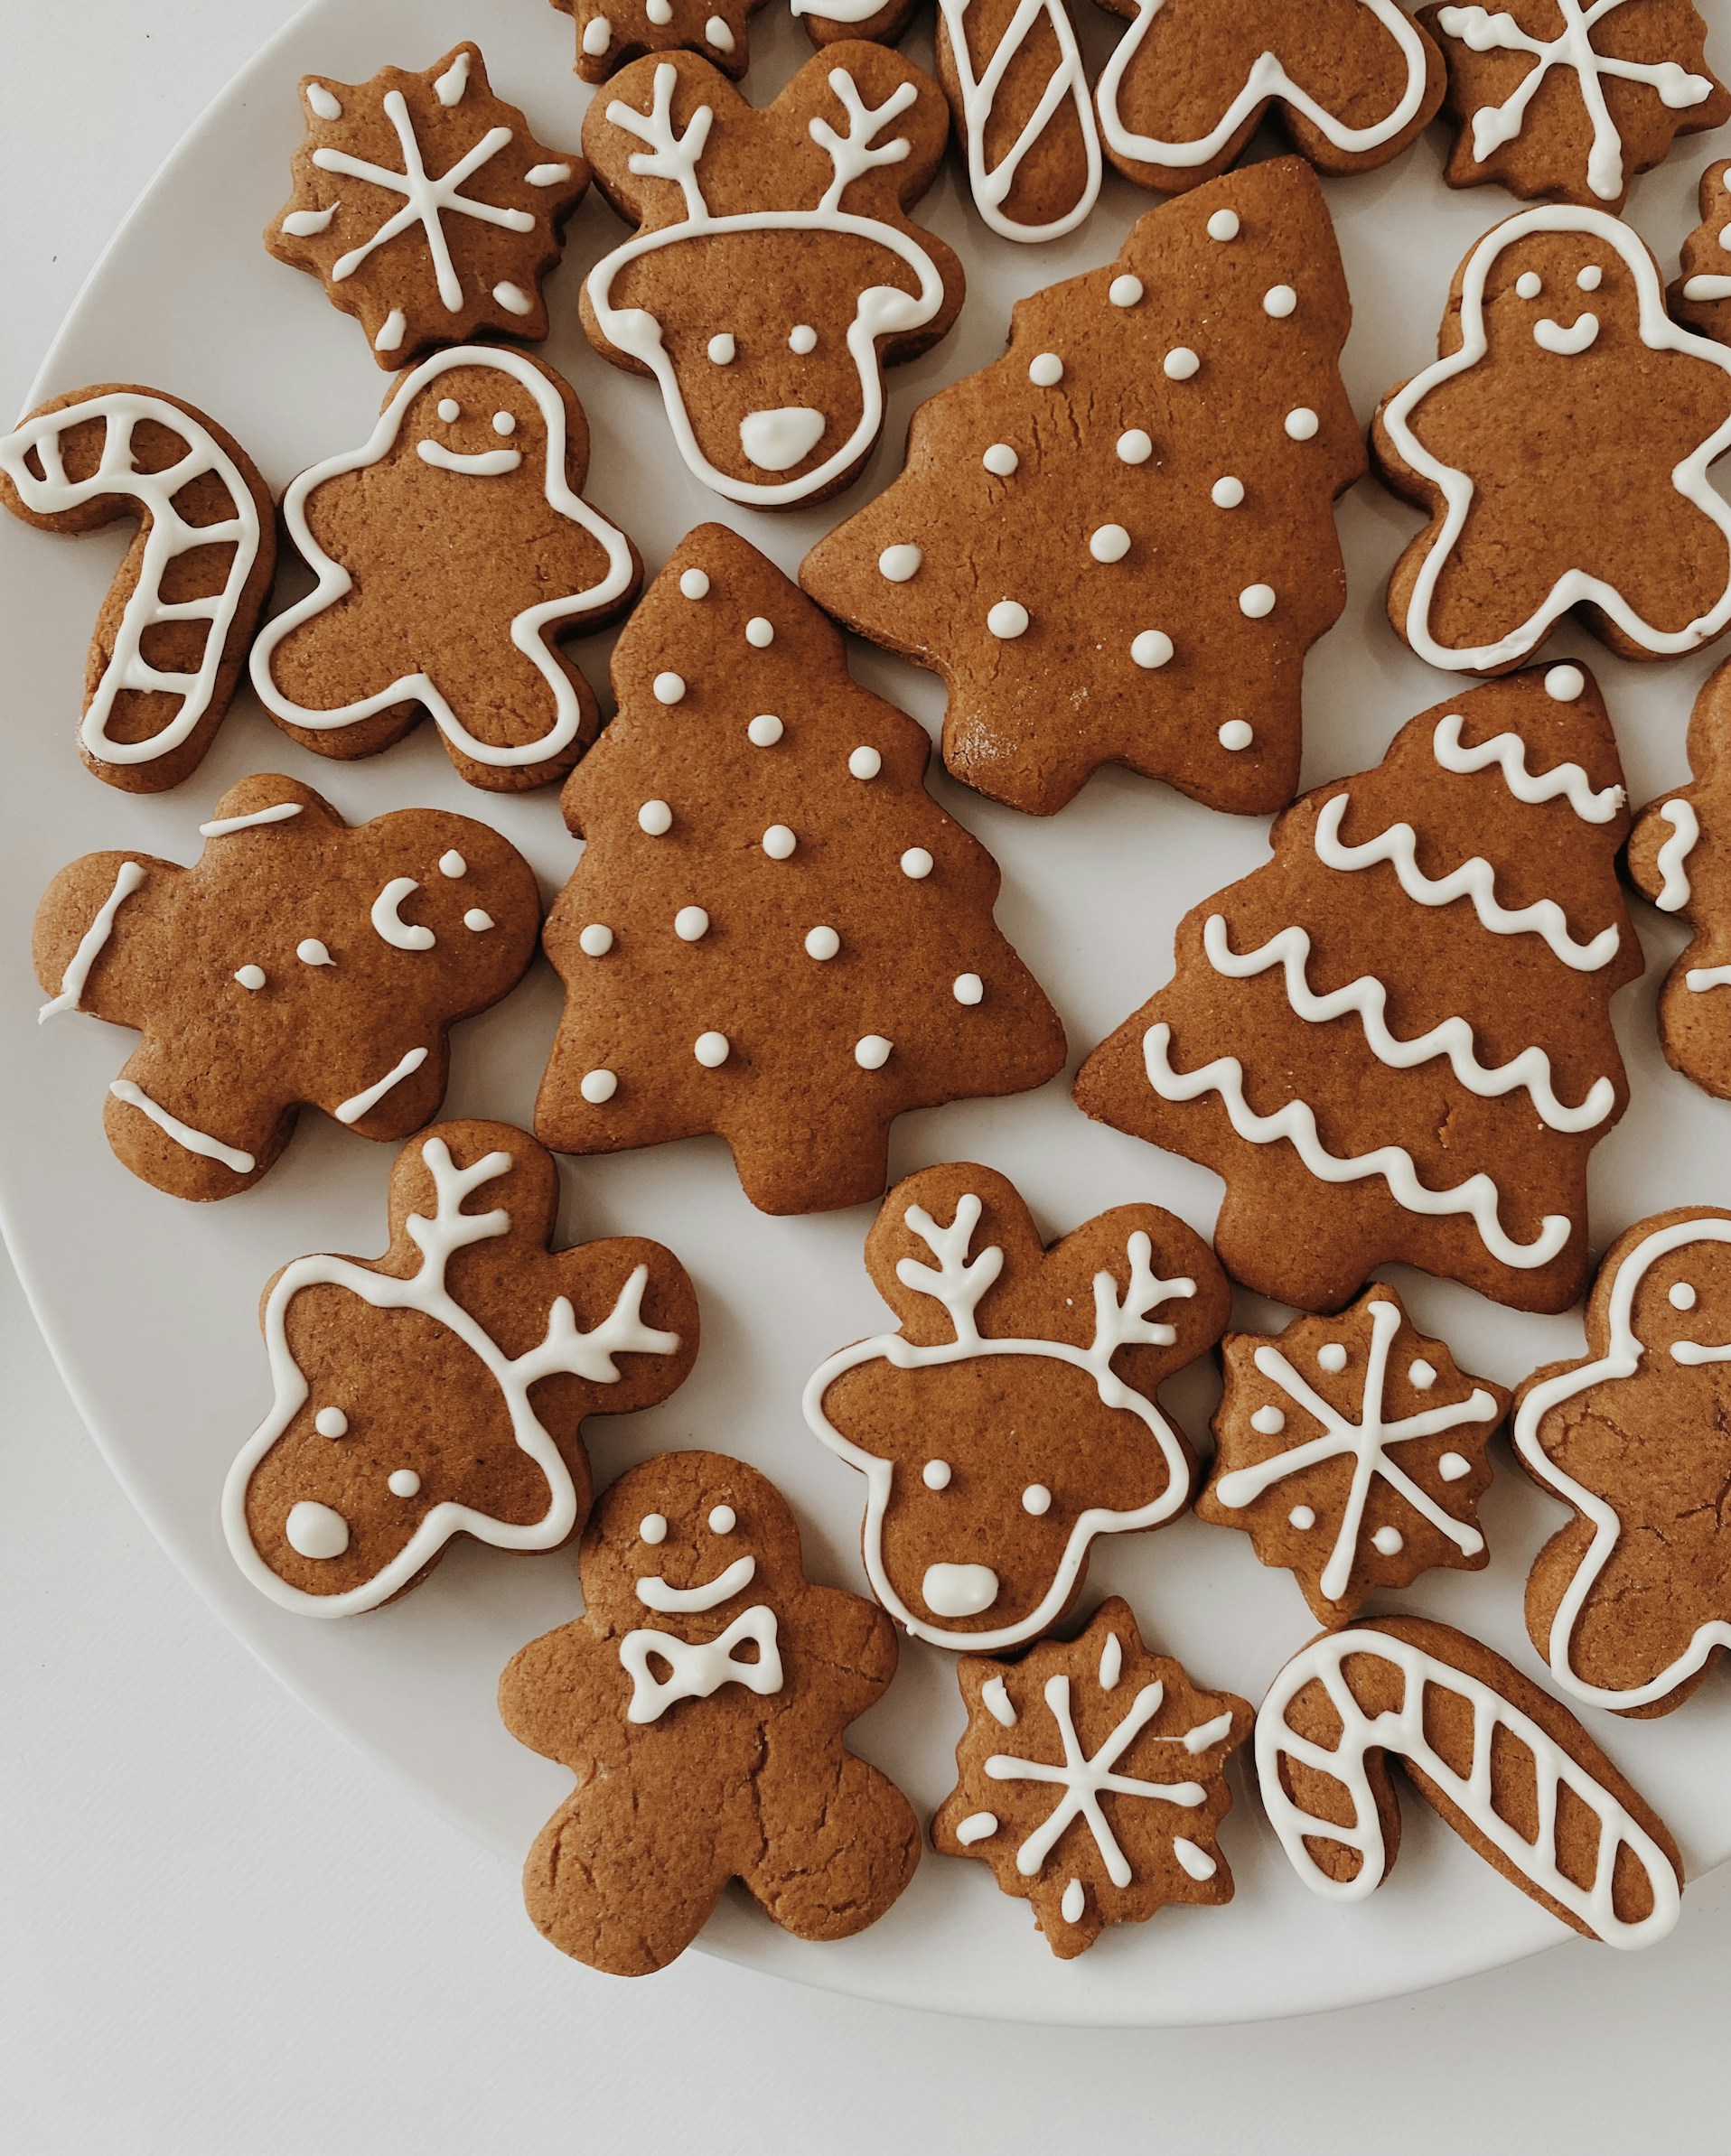 Christmas Baking is a lot easier when you plan ahead - Christmas Baking 2021 - Holiday Baking made easy